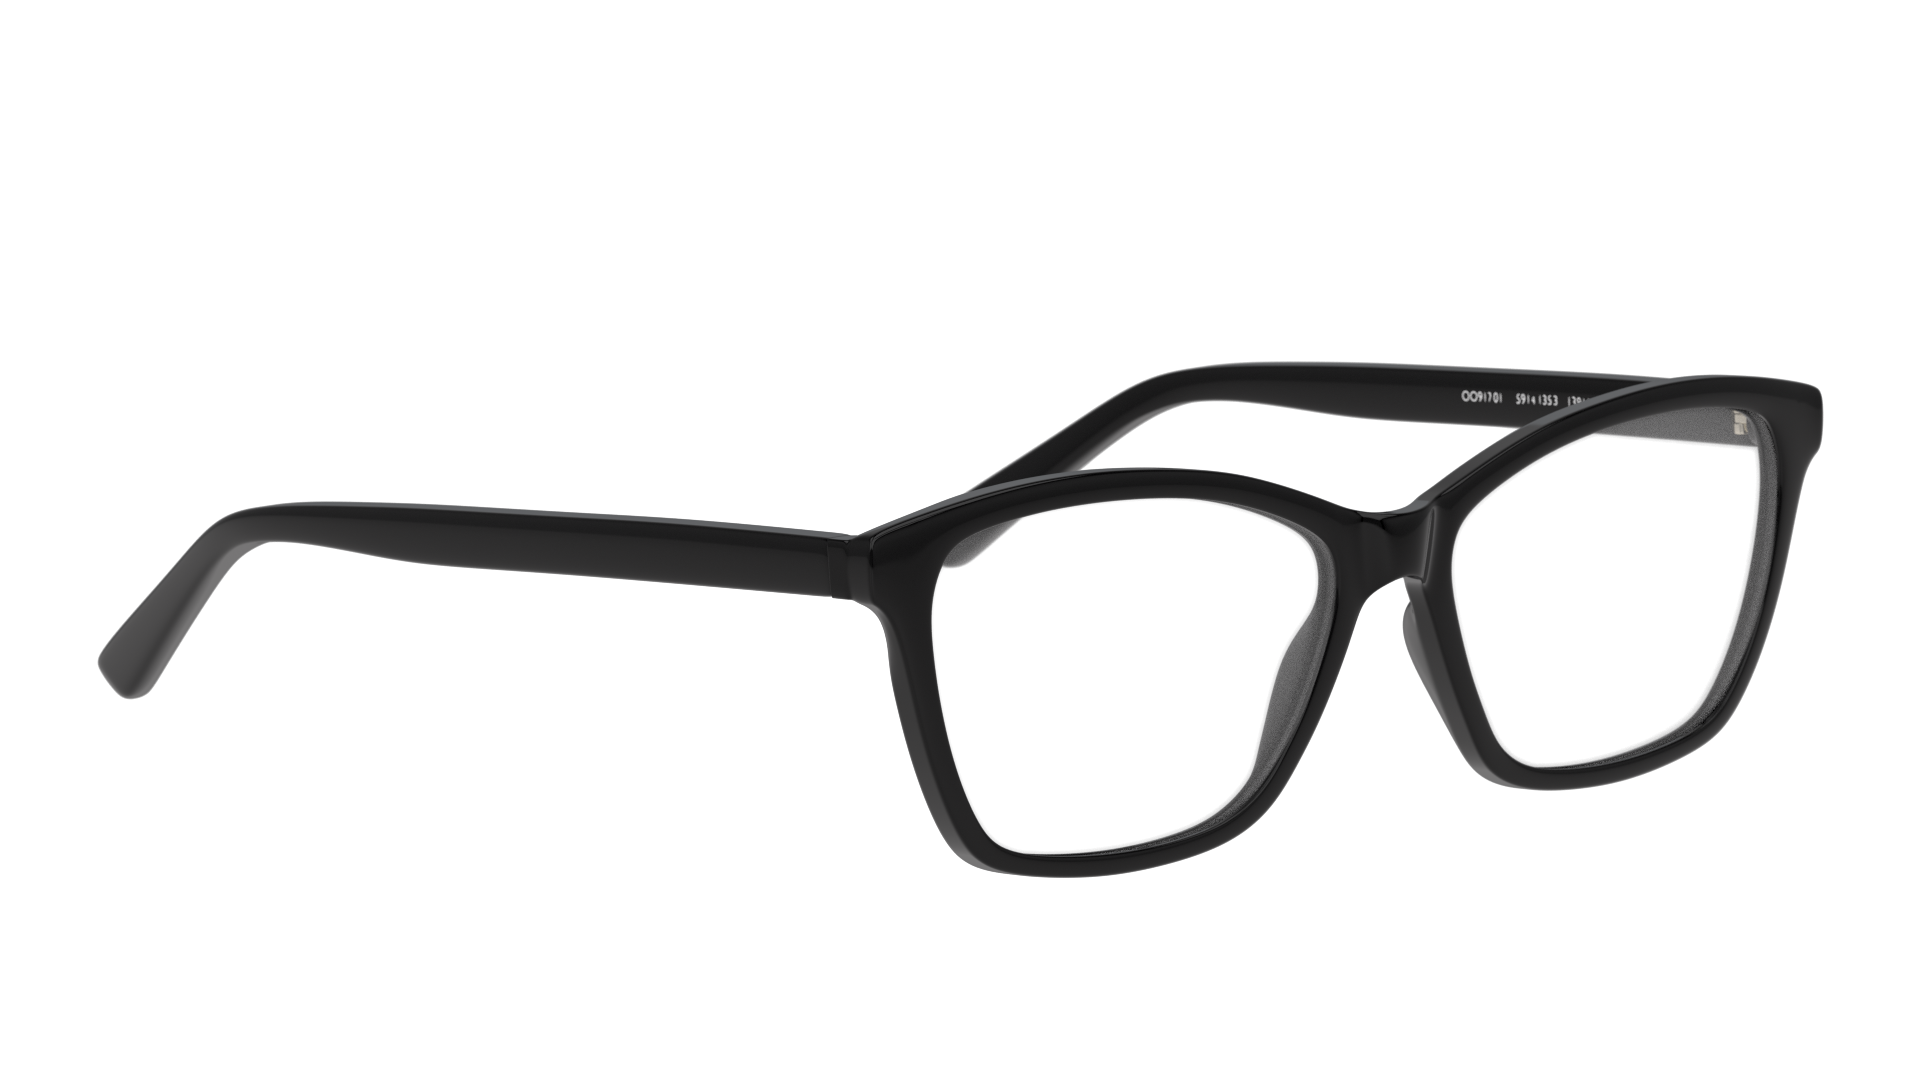 Angle_Right01 Seen SN FF10 (BB00) Glasses Transparent / Black